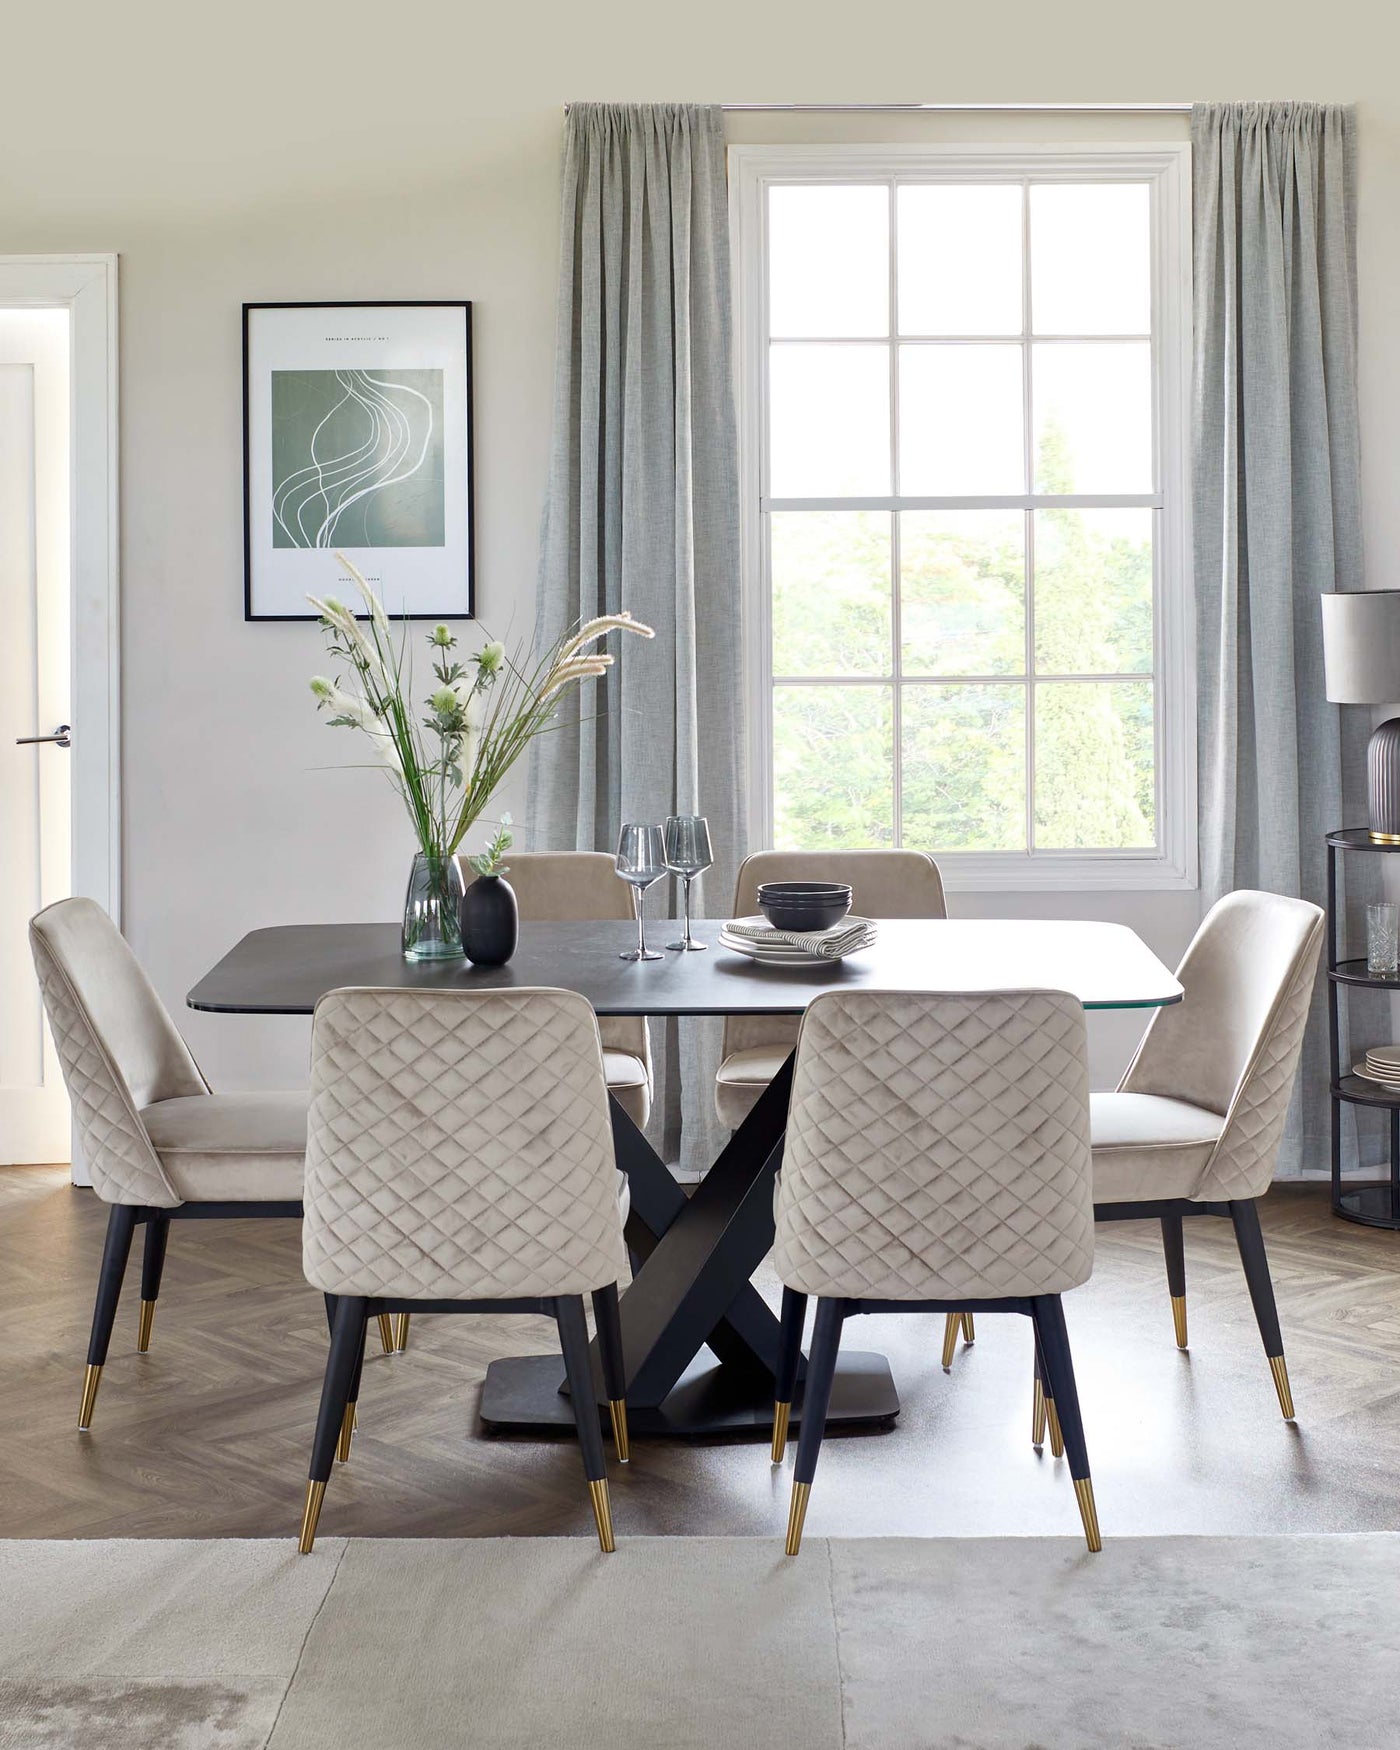 Elegant dining room featuring a modern rectangular table with a smooth dark top and a striking geometric black base, complemented by six plush, quilted dining chairs in a light taupe fabric. The chairs boast slender black legs with gold accent tips, matching the table's sophisticated aesthetic.